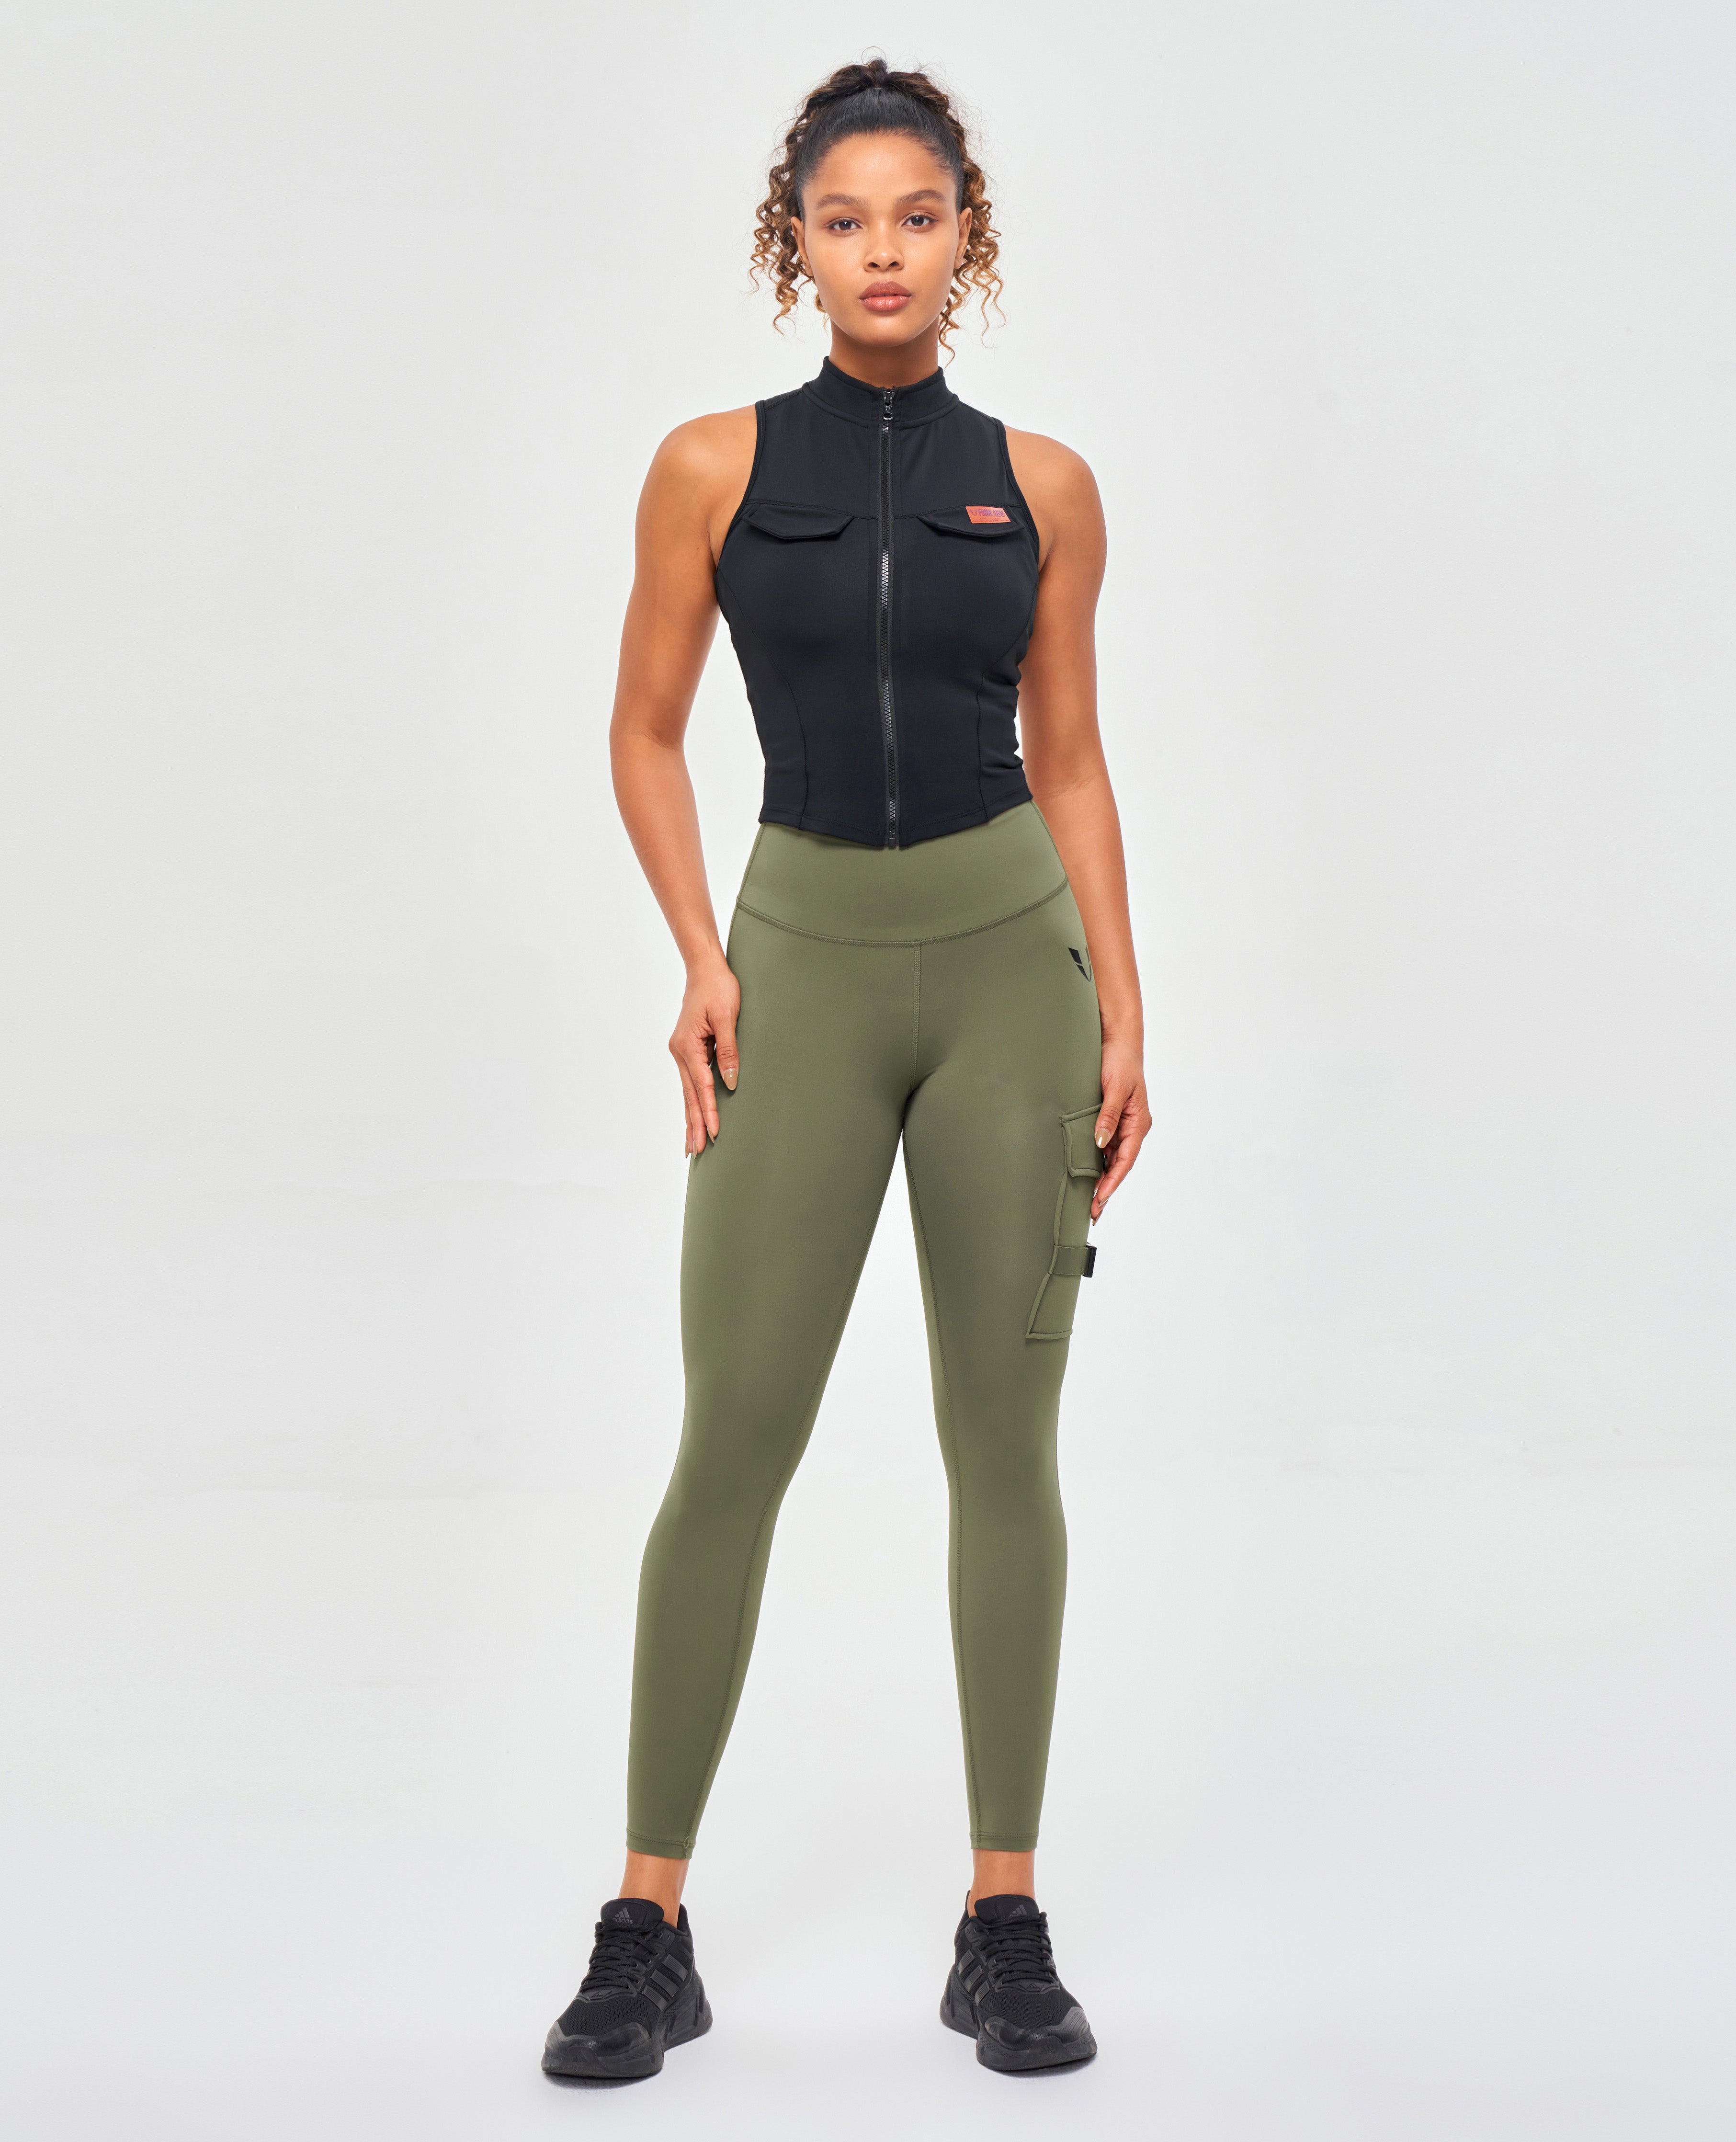 Nike Tight Fit Leggings Olive Army Green Size XS - $60 New With